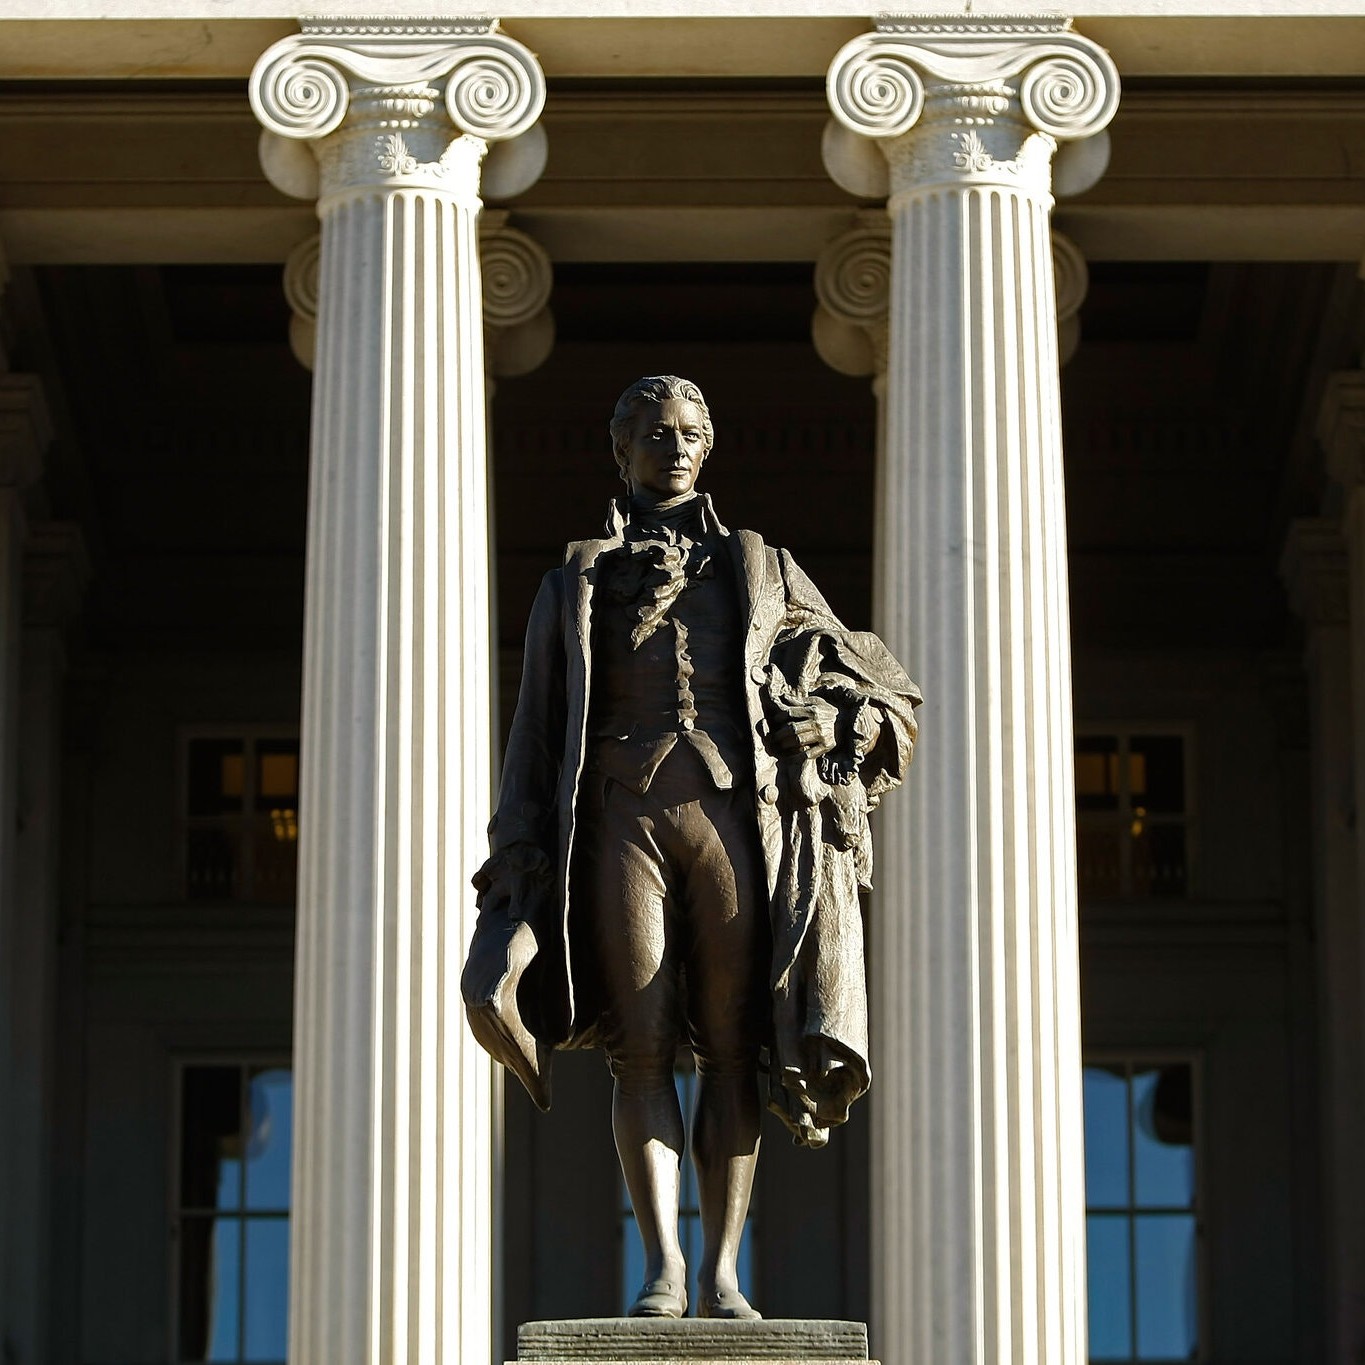 Alexander Hamilton: New Research Says He was an Enslaver